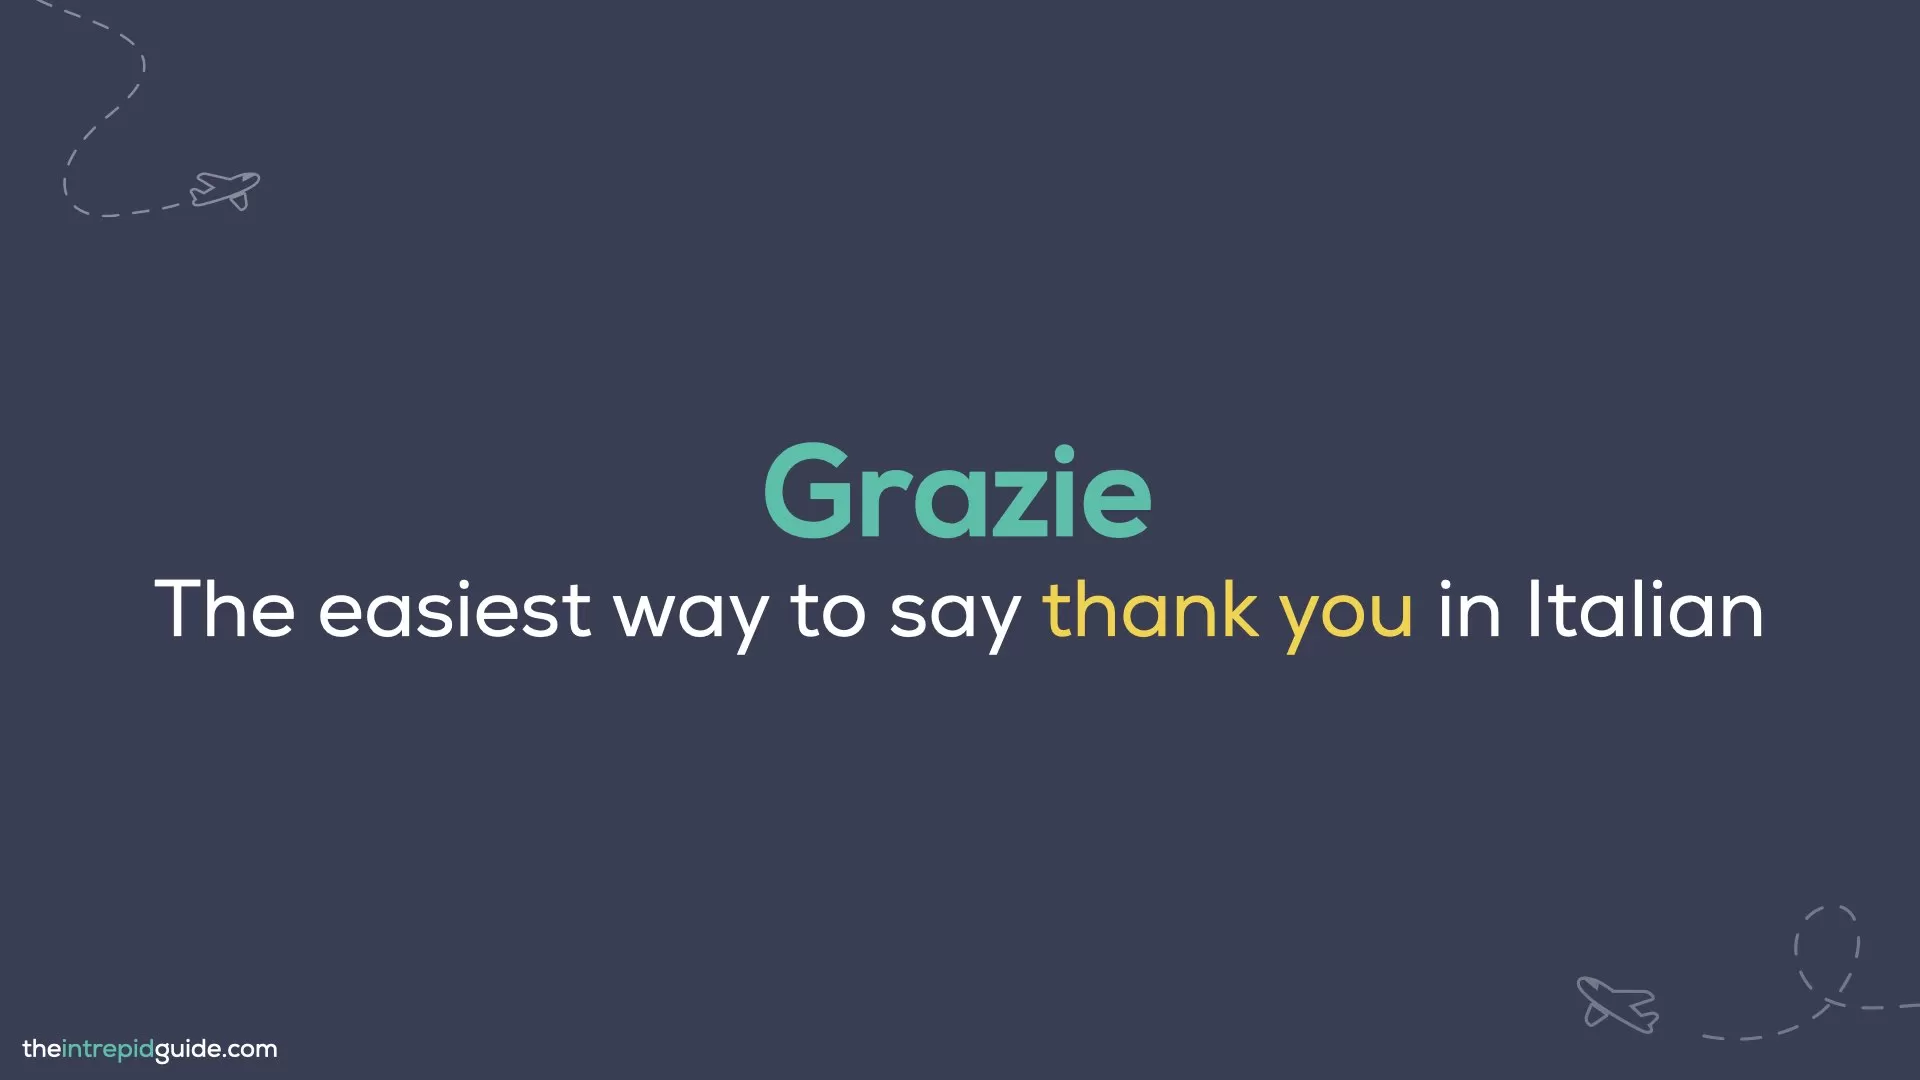 How to say thank you in Italian - Grazie